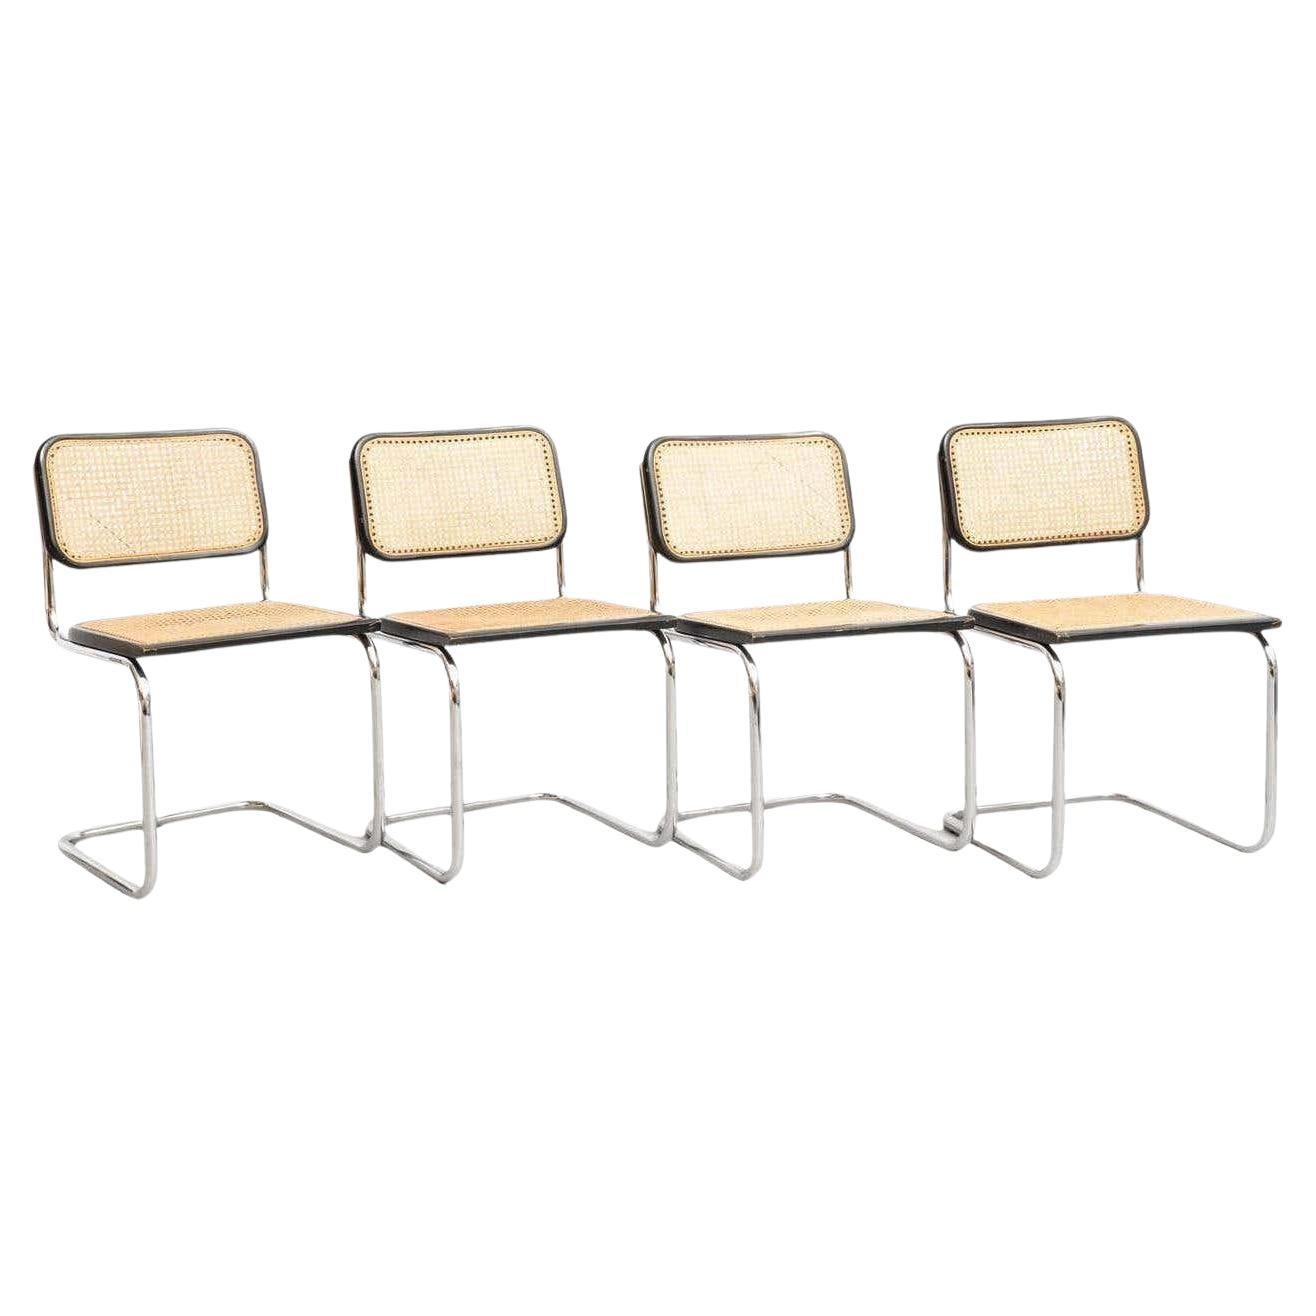 Set of 4 Marcel Breuer Cesca Metal and Wood Mid-Century Modern Chairs, c 1960 For Sale